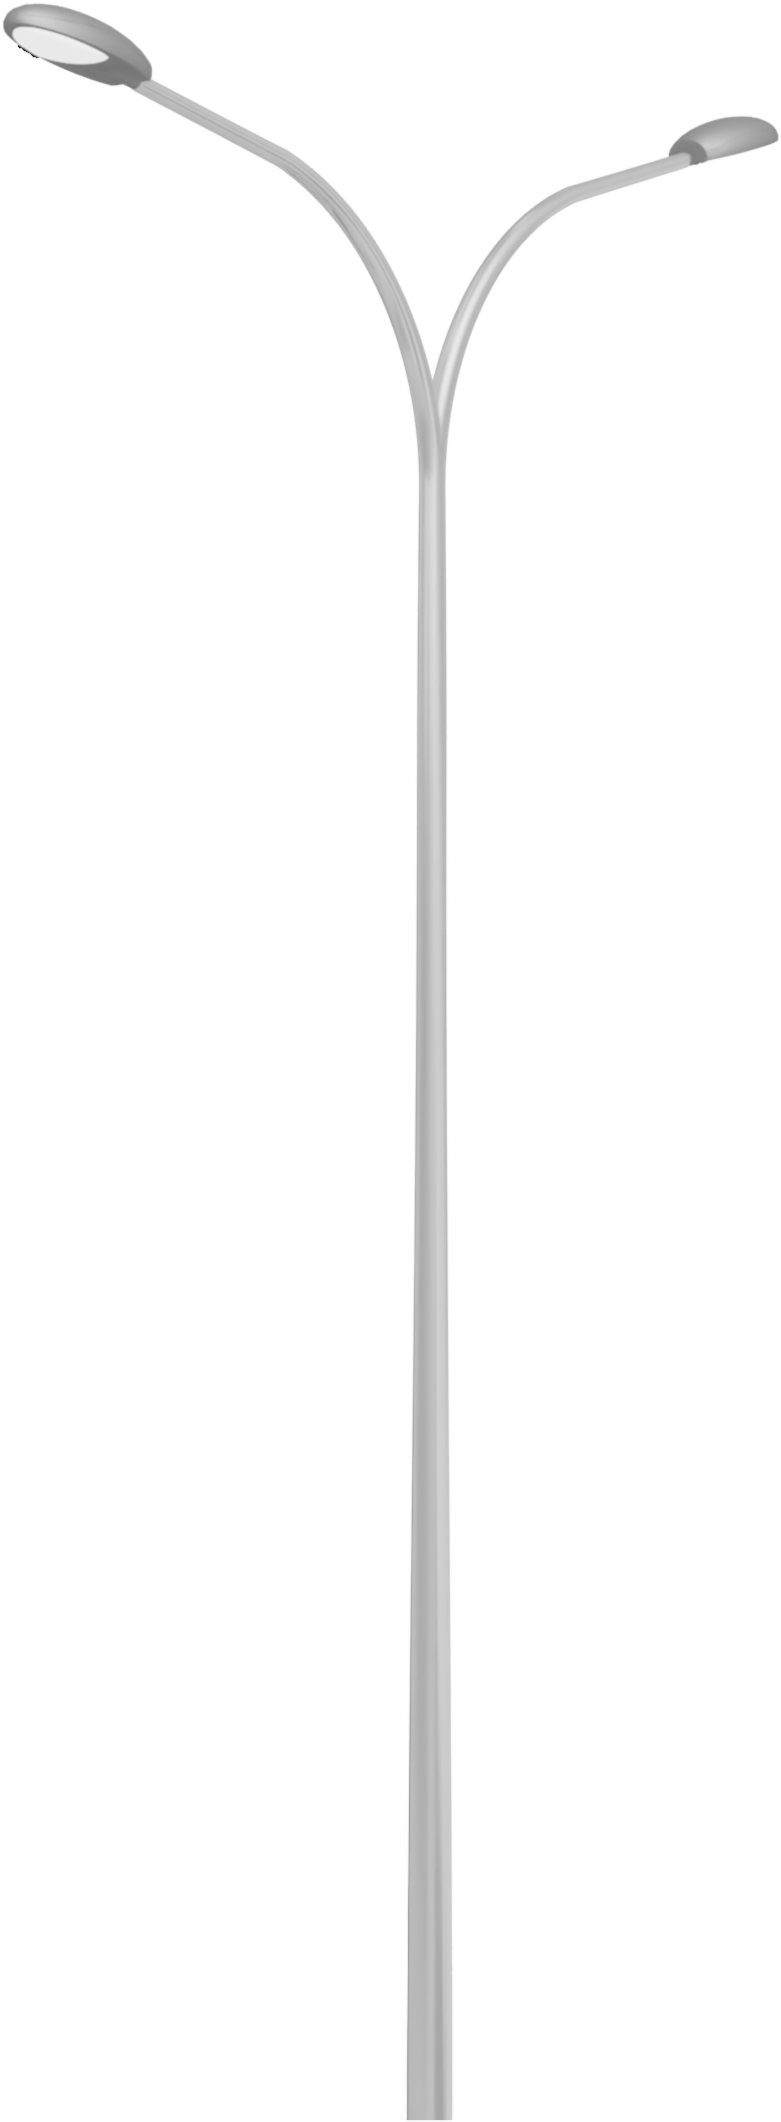 A White Pole With A Black Background